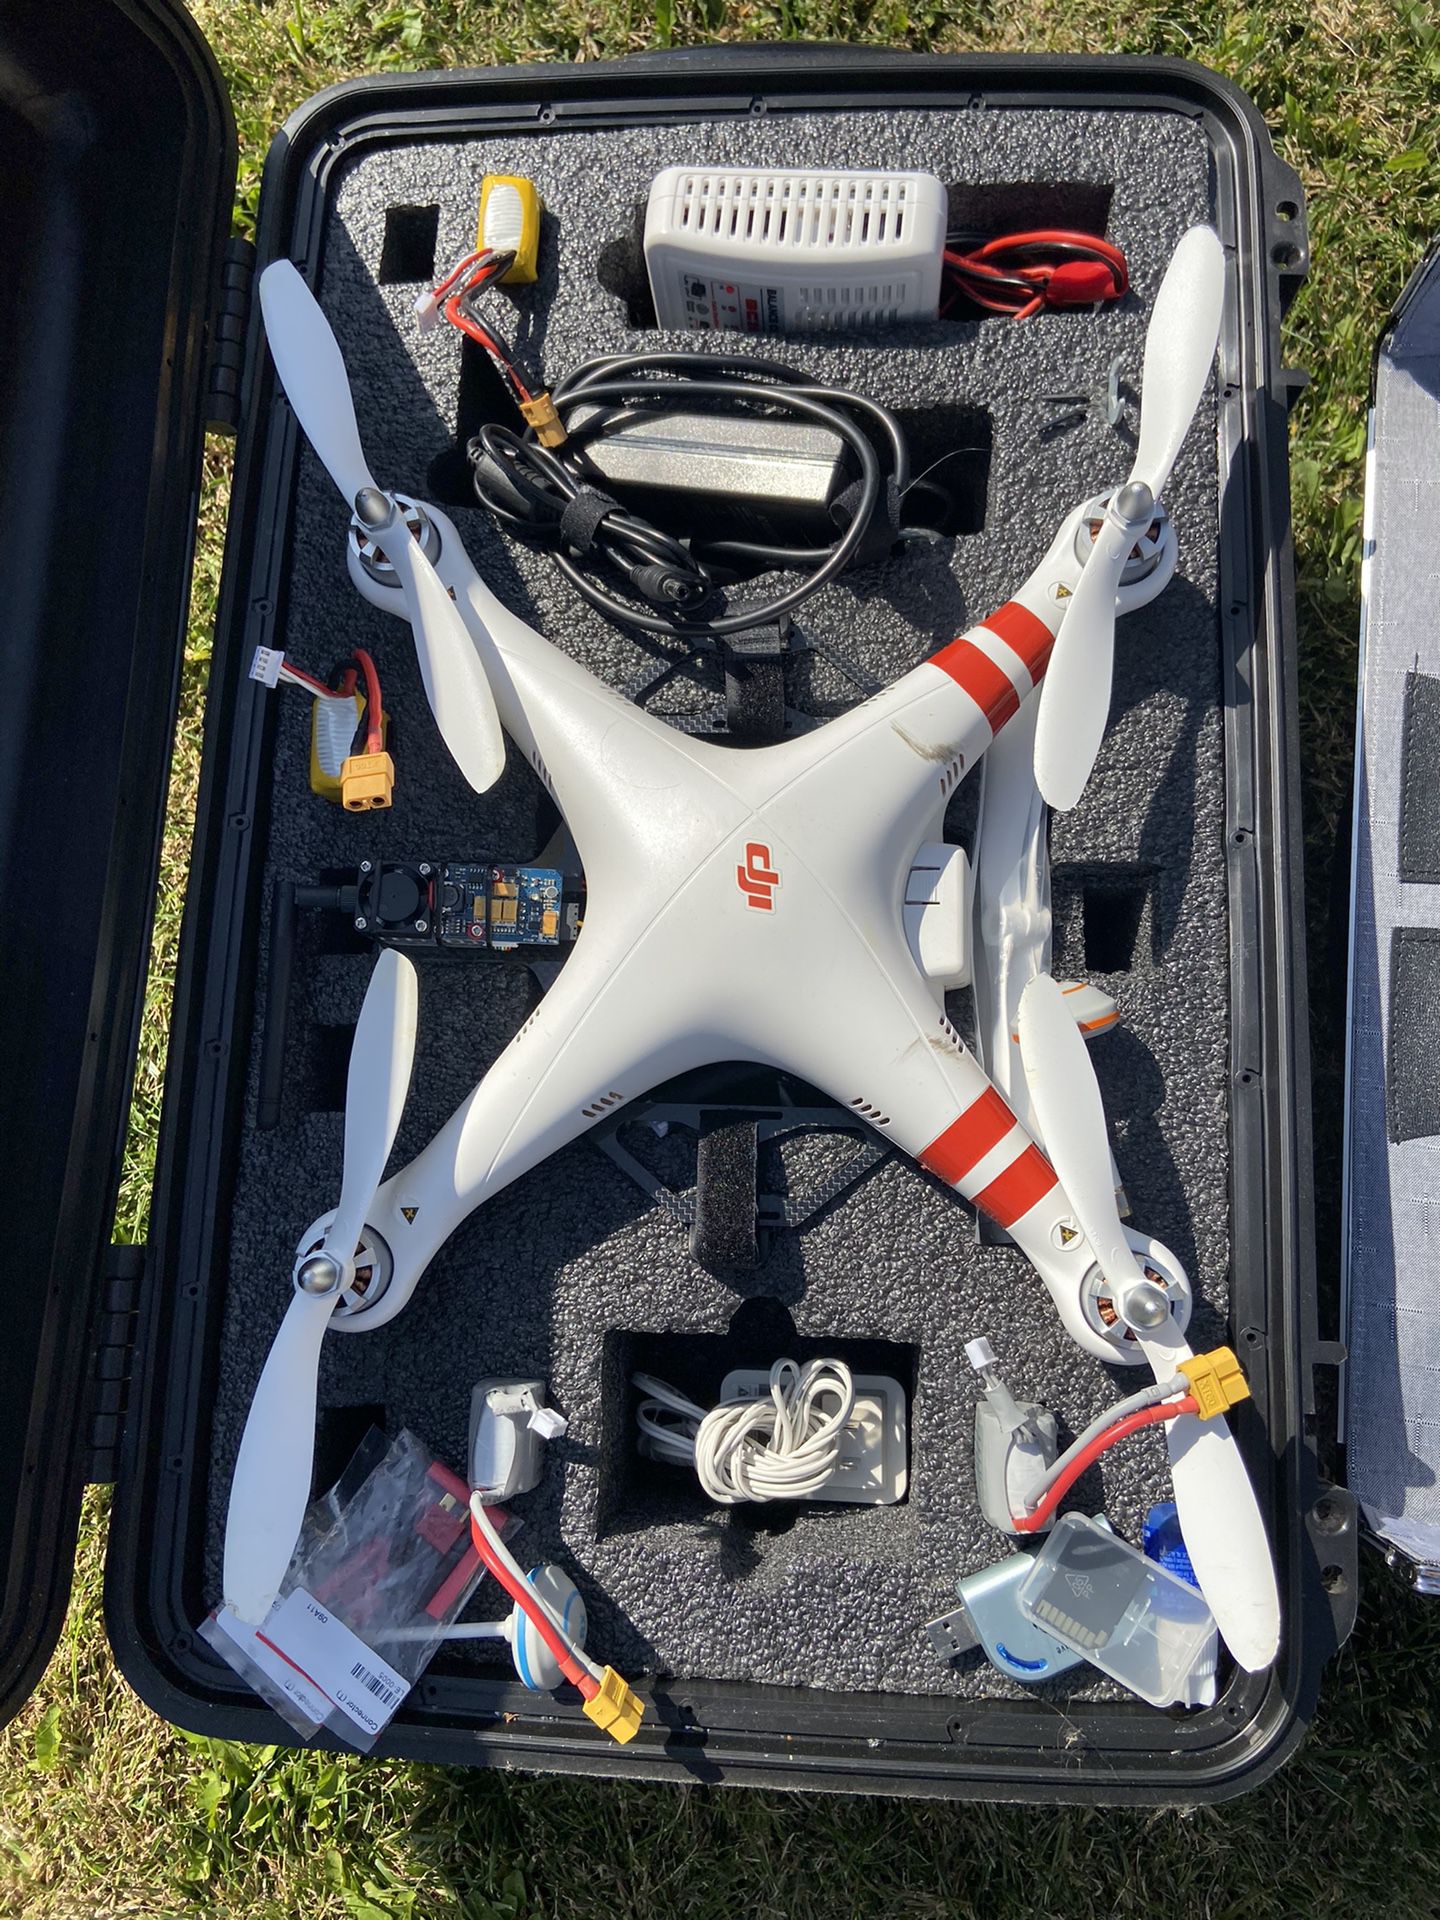 Phantom 1 drone with TONS of extras.